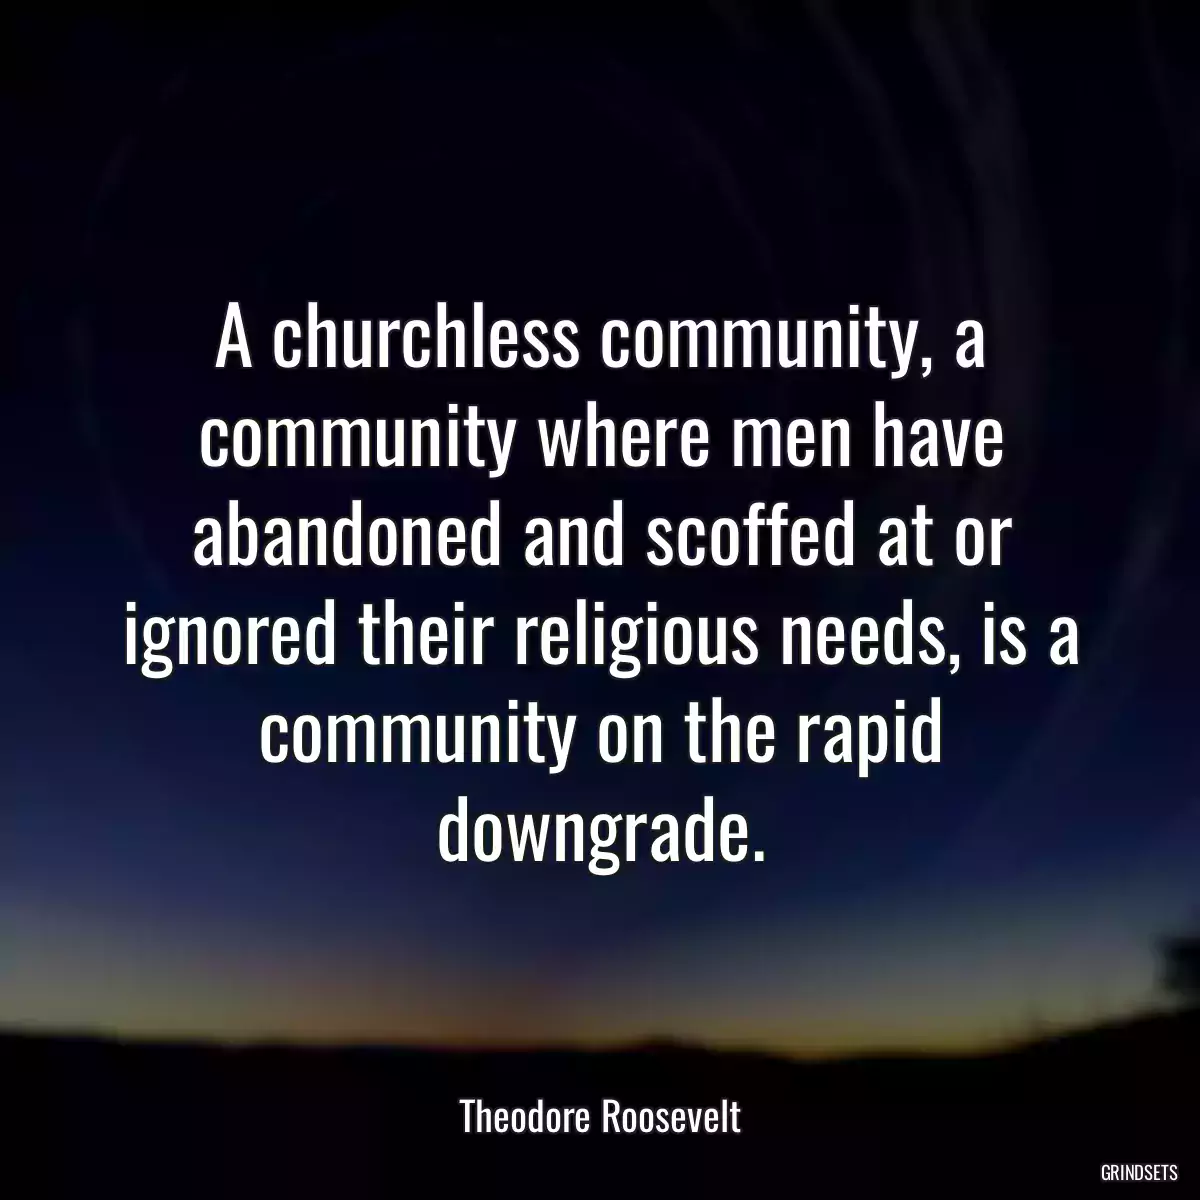 A churchless community, a community where men have abandoned and scoffed at or ignored their religious needs, is a community on the rapid downgrade.